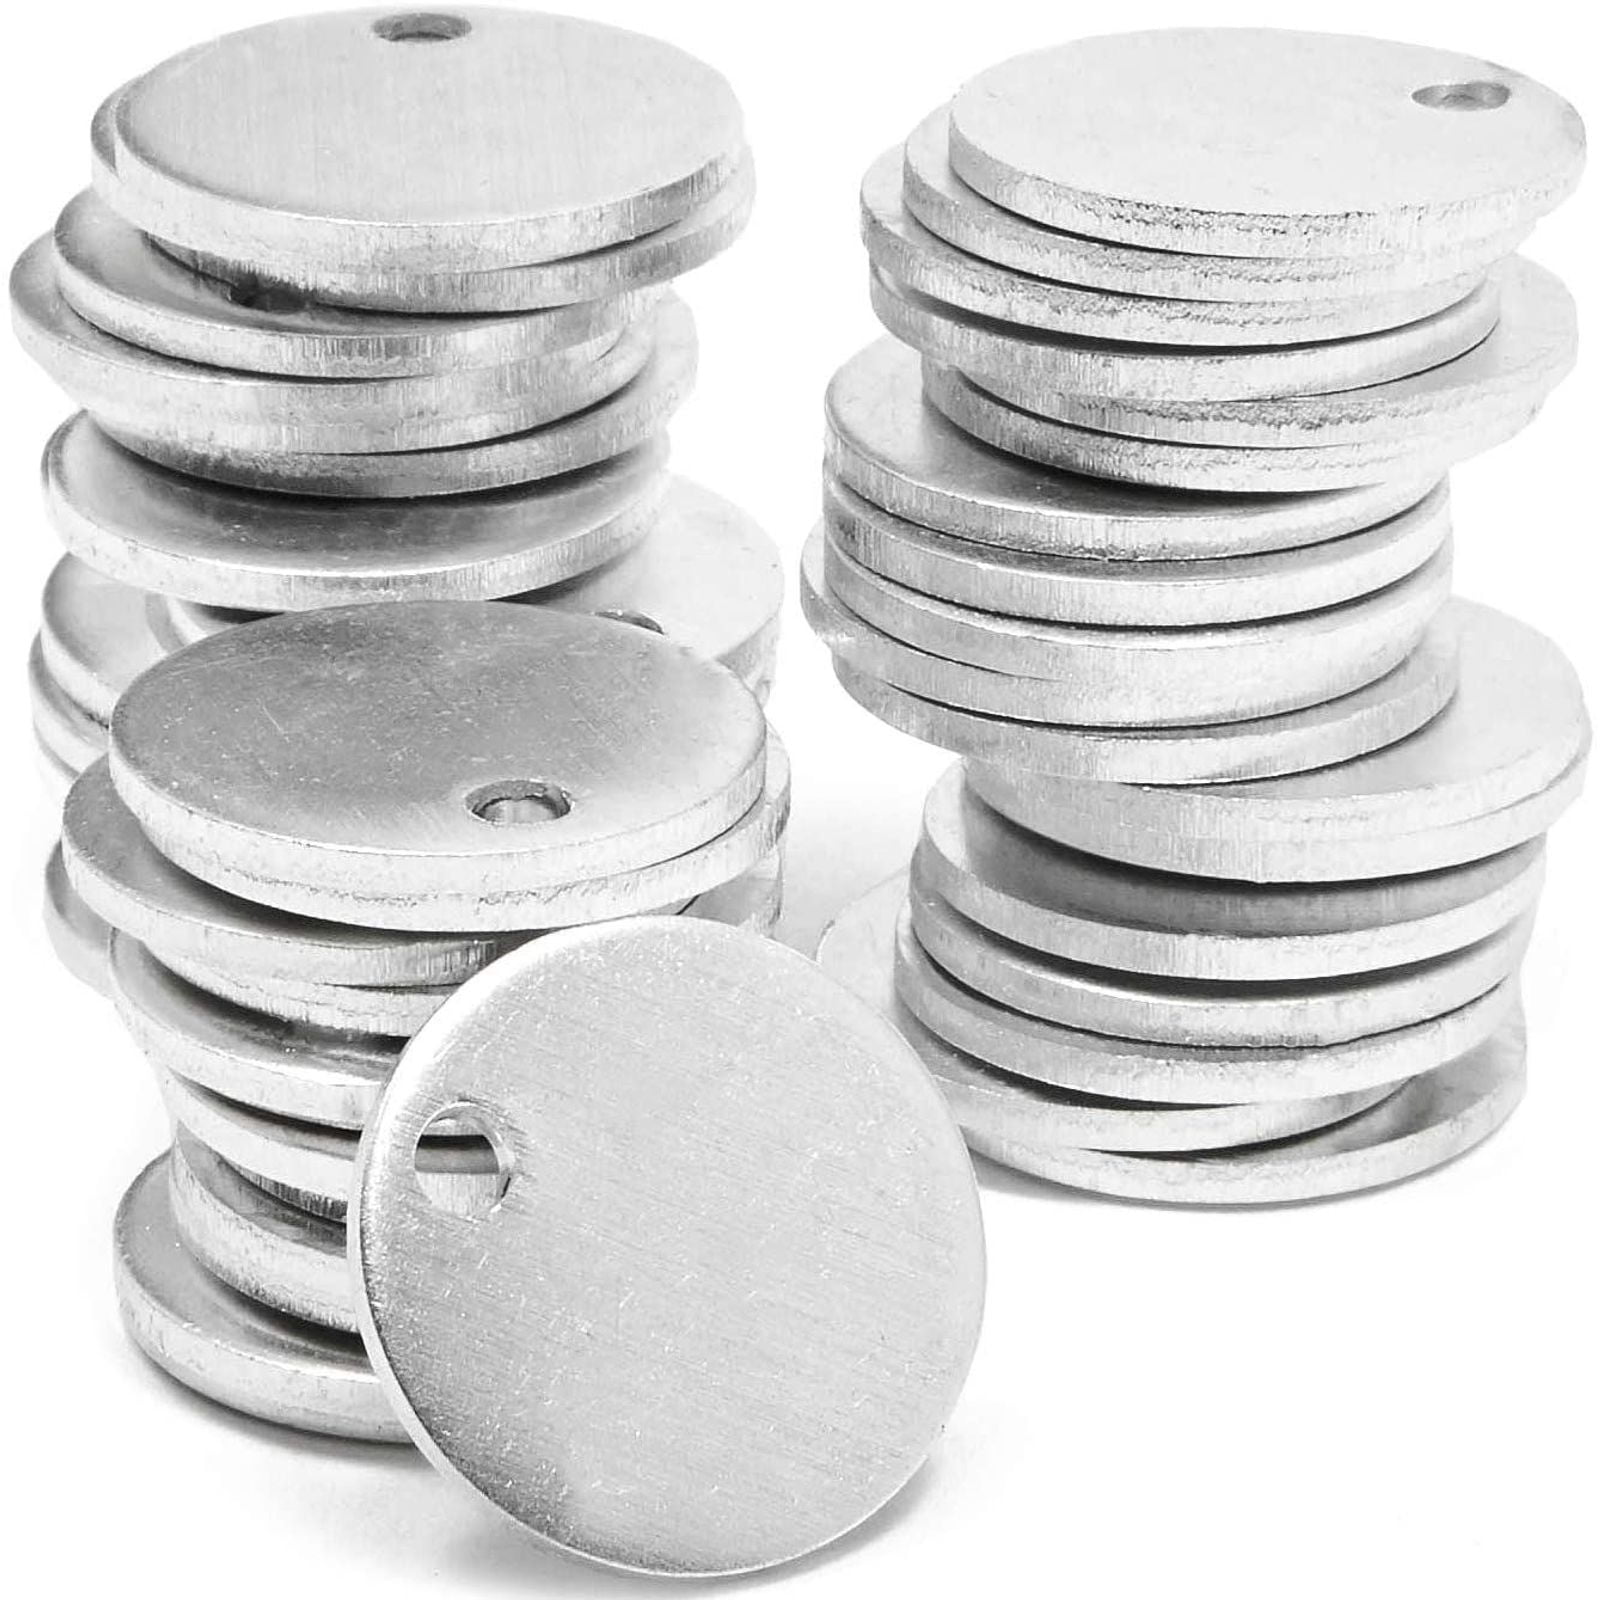 50x Metal Stamping Blanks 0.78 inch Flat Round Aluminum Tags with Hole Silver 